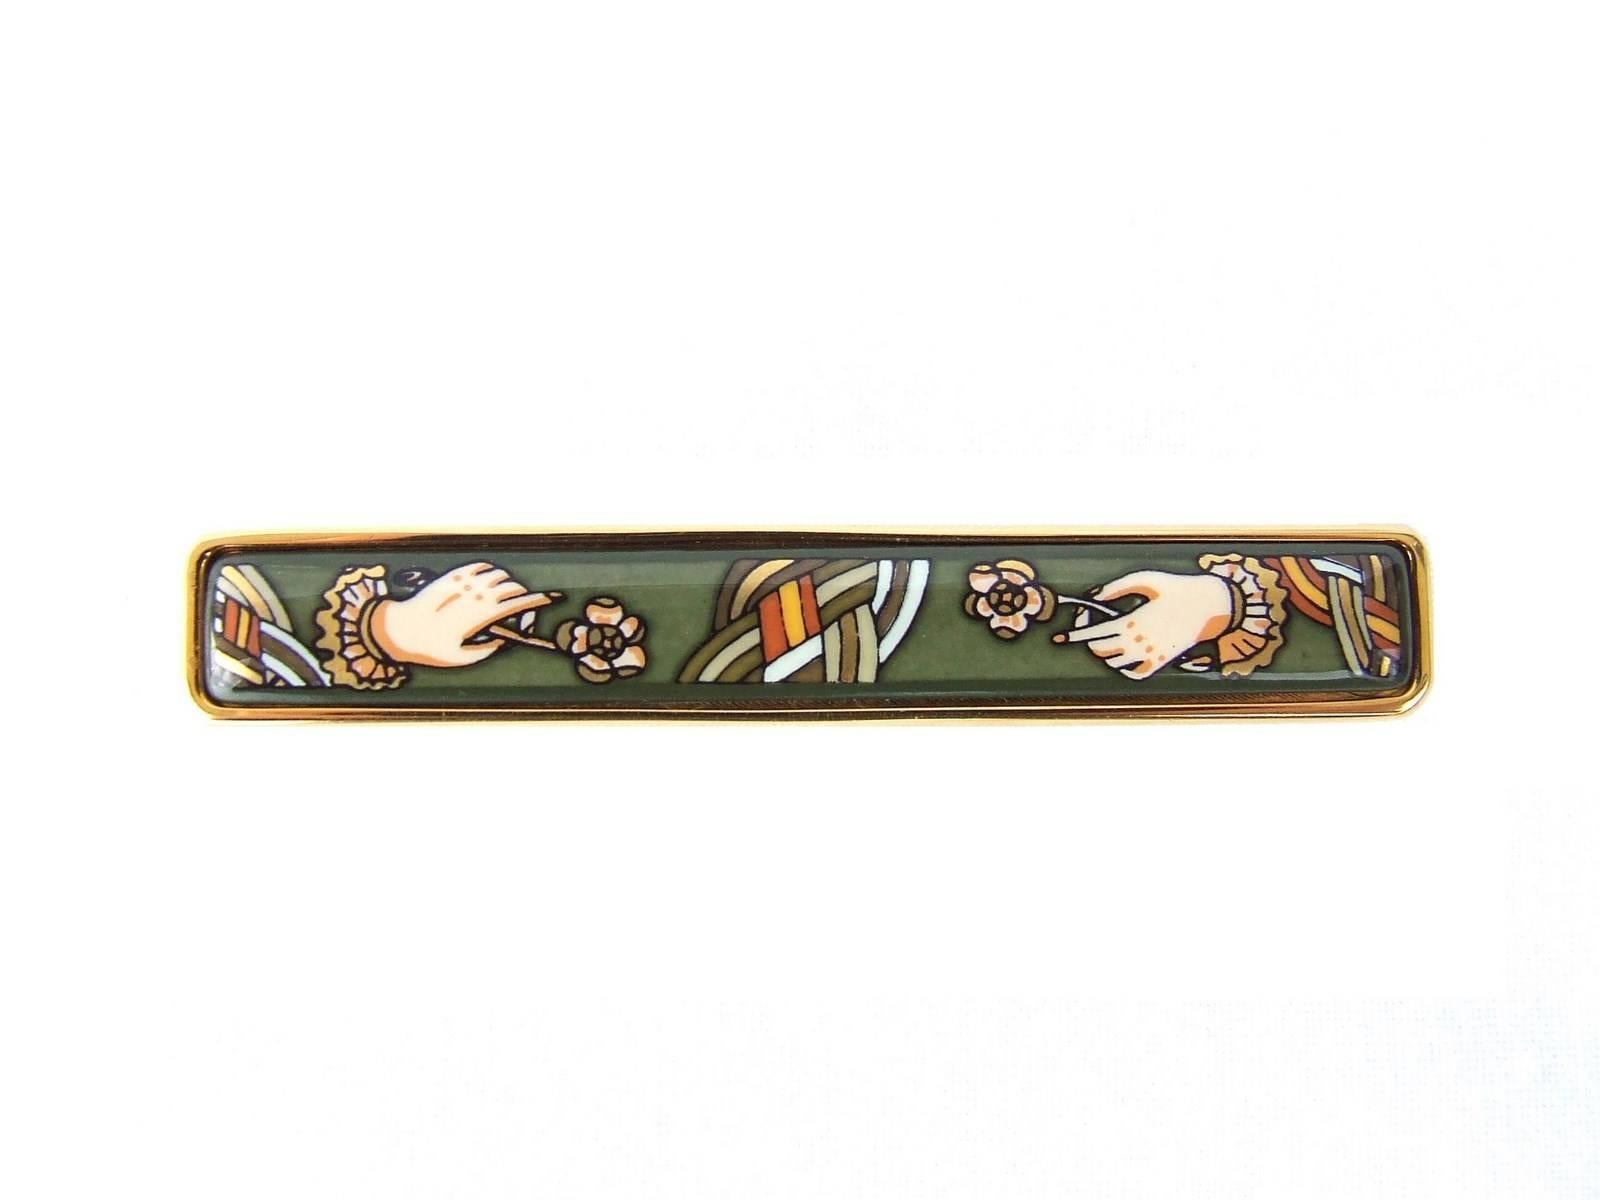 Gorgeous and Rare Hermes Brooch

Pattern: Flowers in Hands and a Braid

Made in France

Made of Enamel and Gold Plated Hardware

Colorways: Olive Green Background, Beige, White, Gold, Camel

